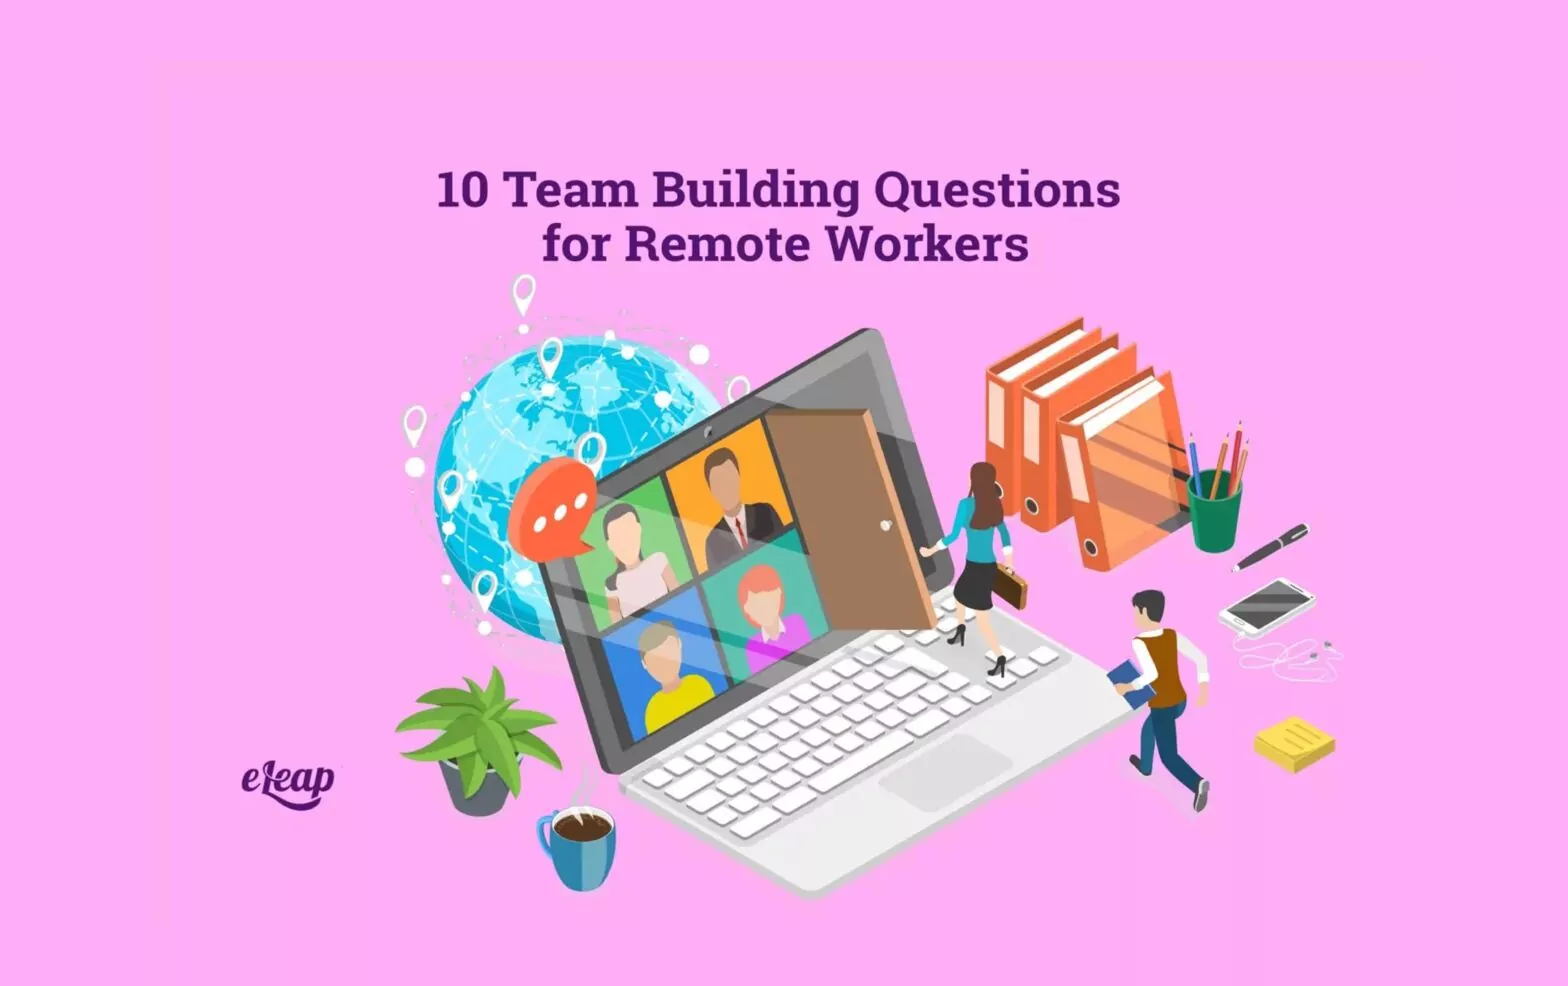 10 Team Building Questions for Remote Workers